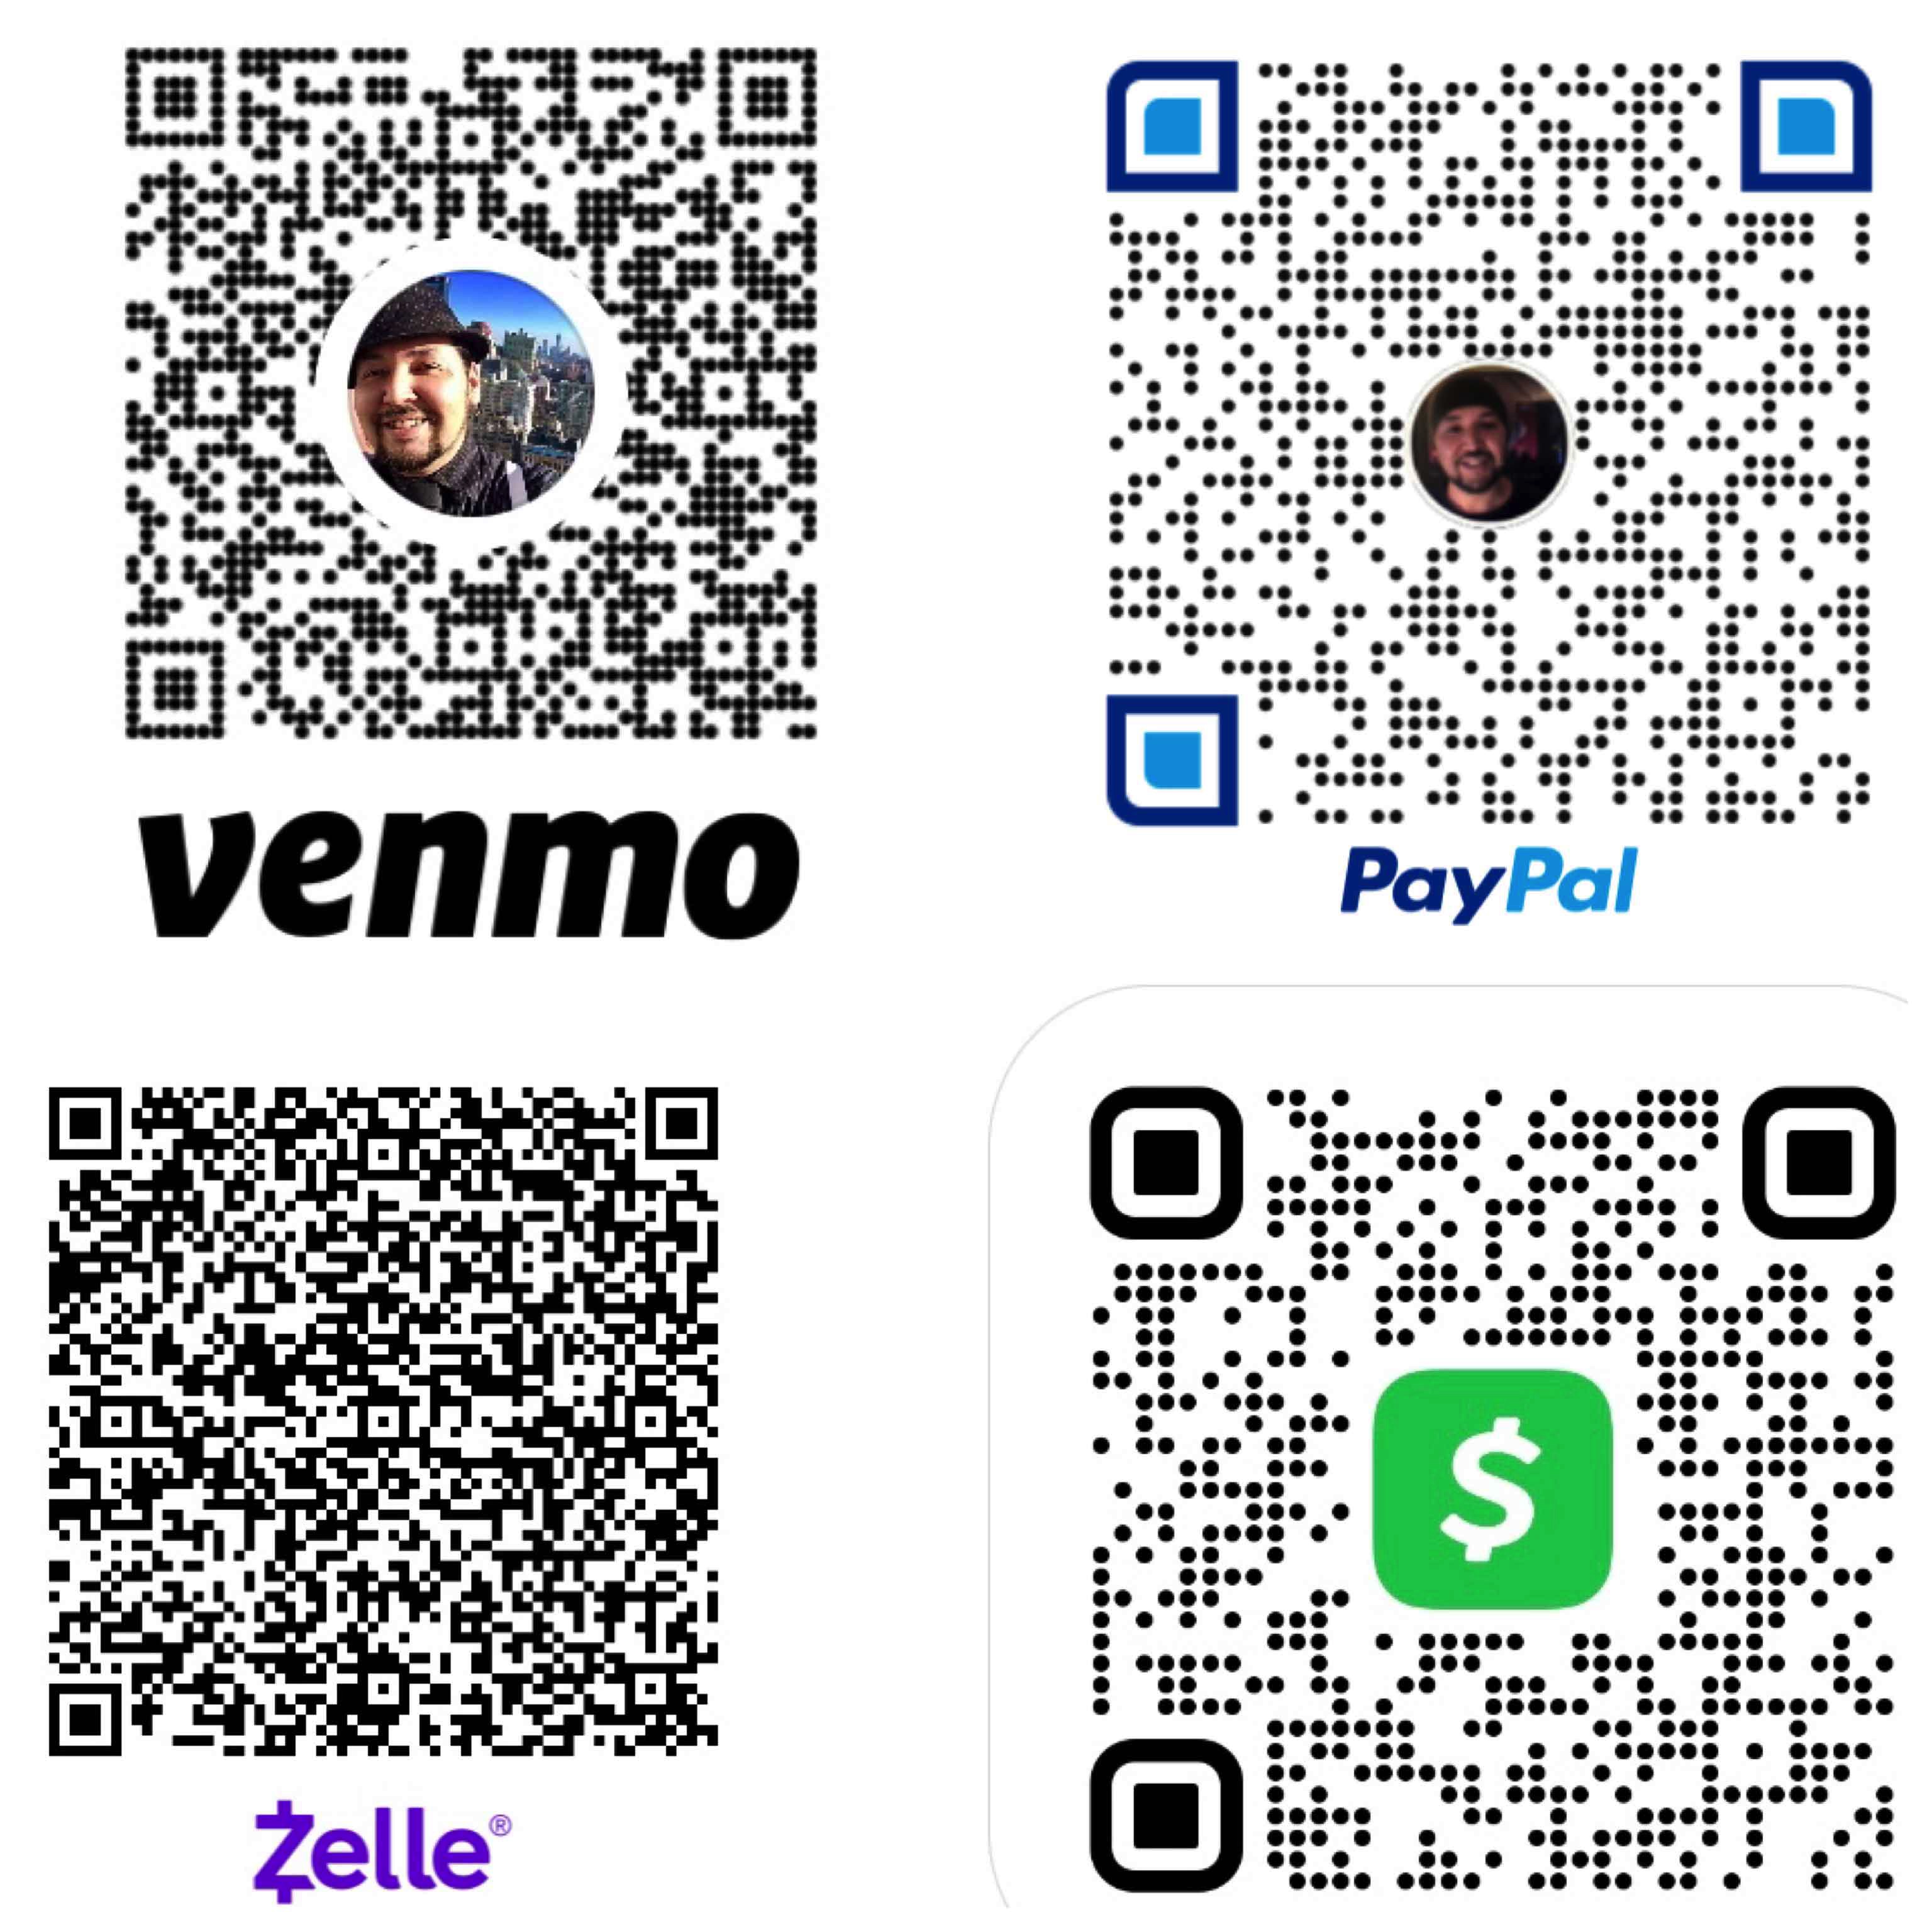 QR code Images for Venmo, Zelle, Cash app and PayPal to Pay Magician Omar Olusion of S.i. N.Y.C.